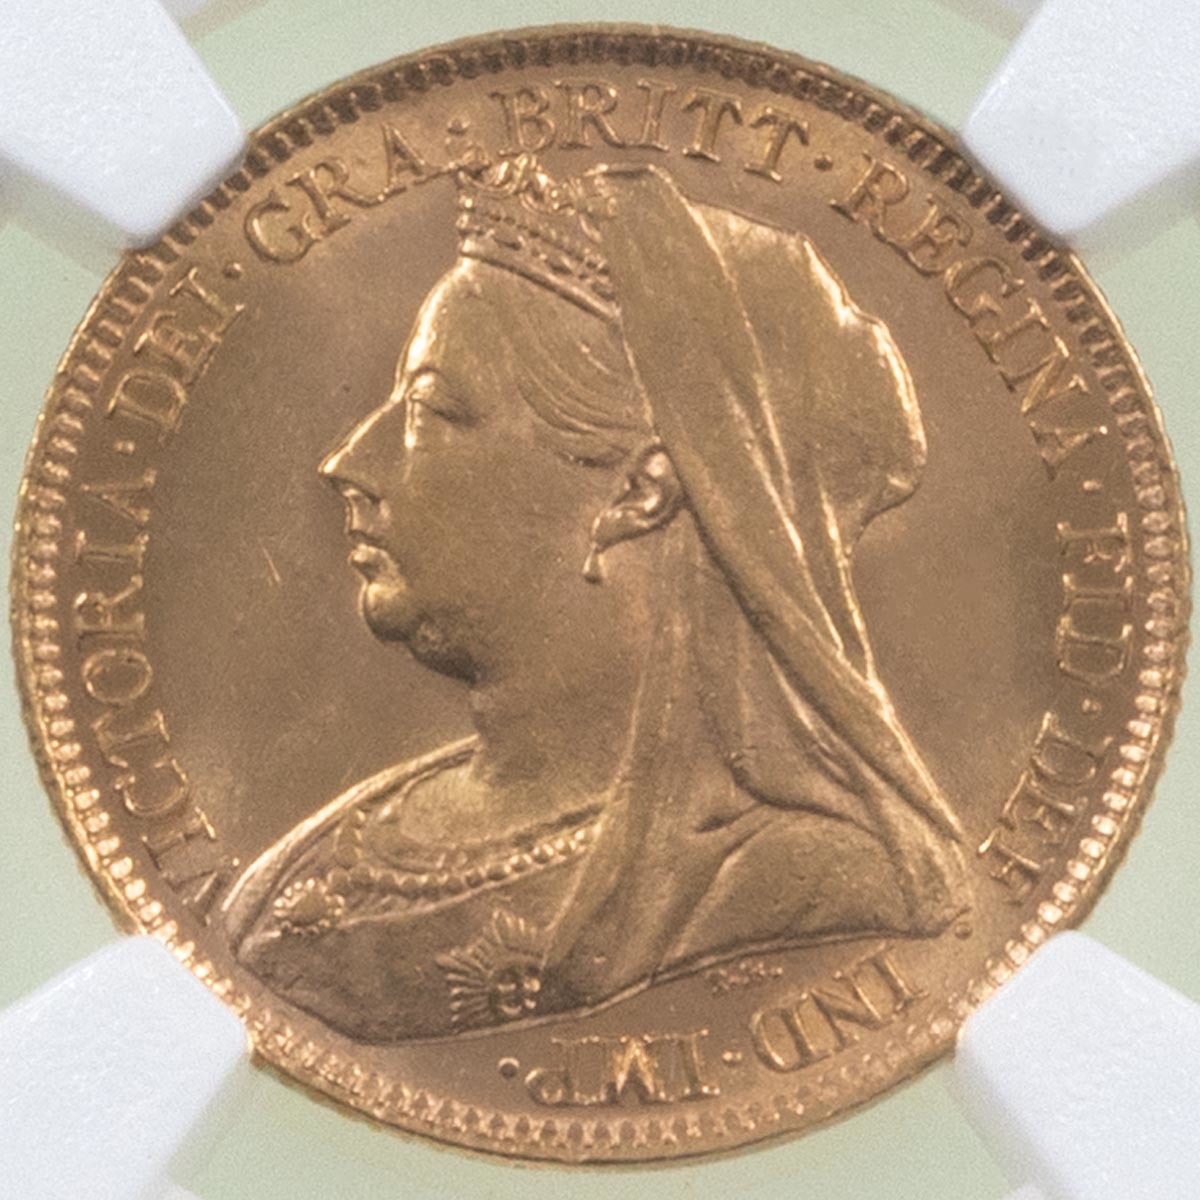 1896 Queen Victoria Gold Half Sovereign London Mint NGC Graded MS 62 Obverse